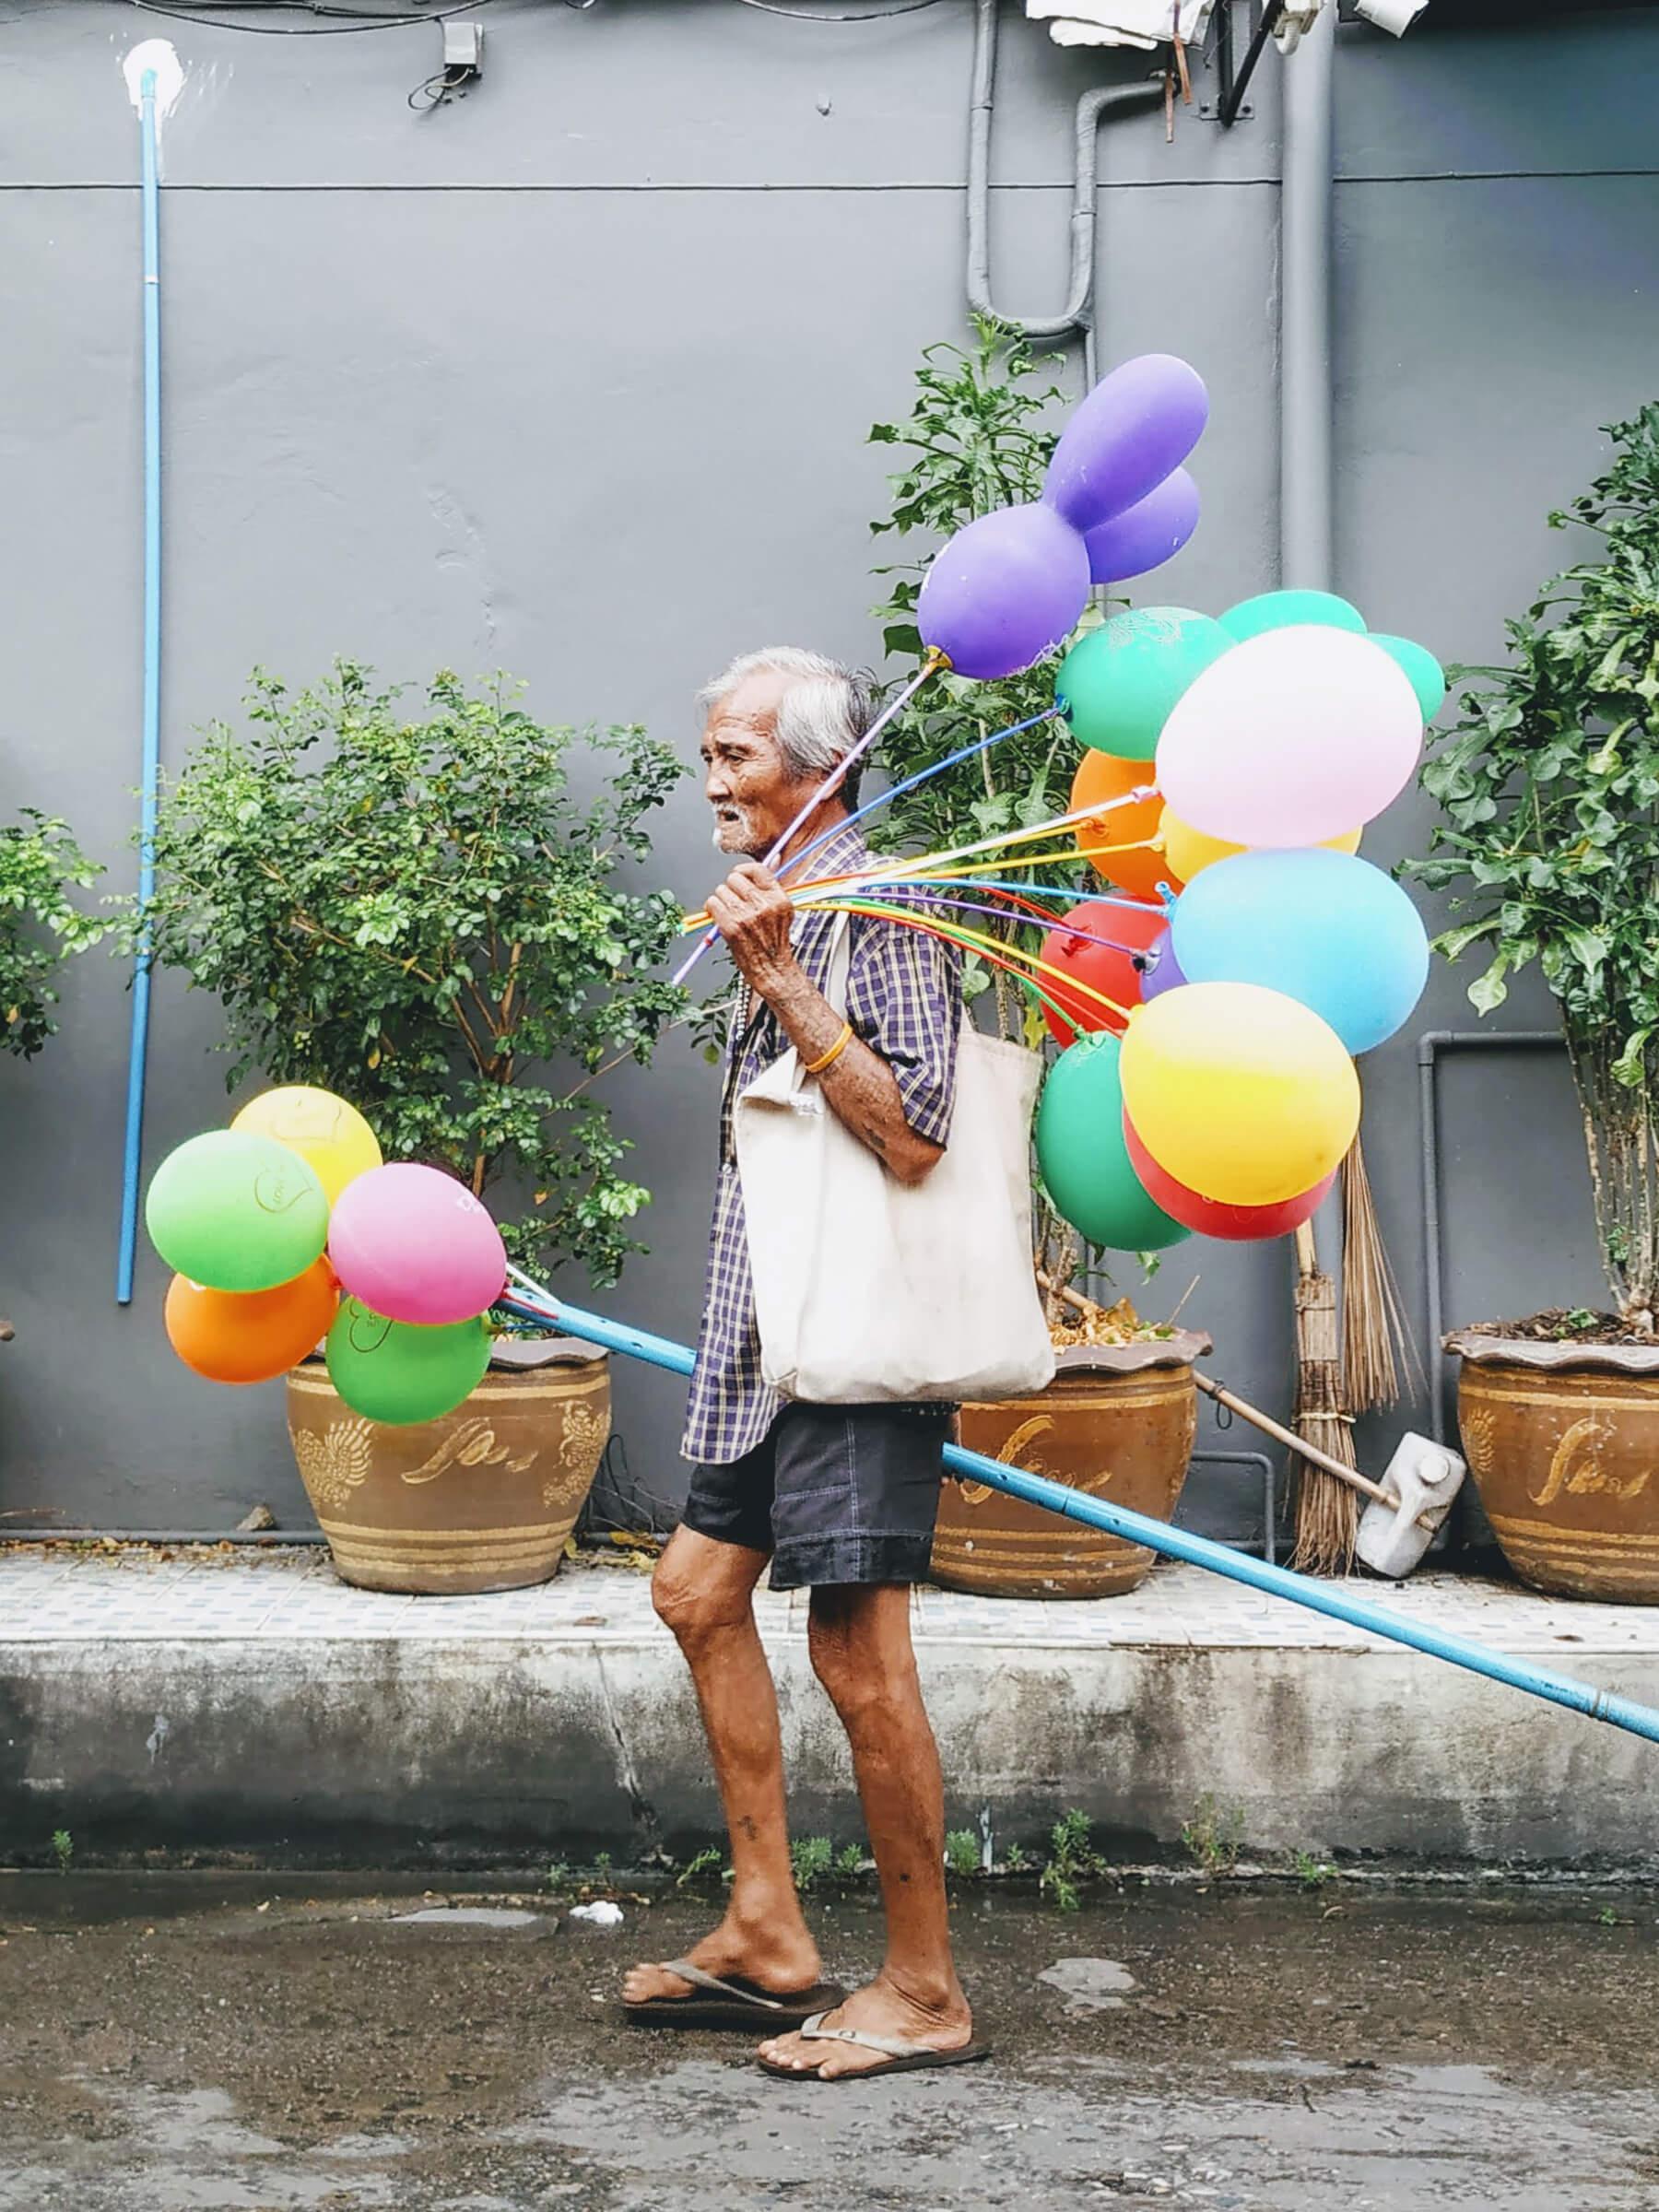 A photo of an old man carrying balloons.